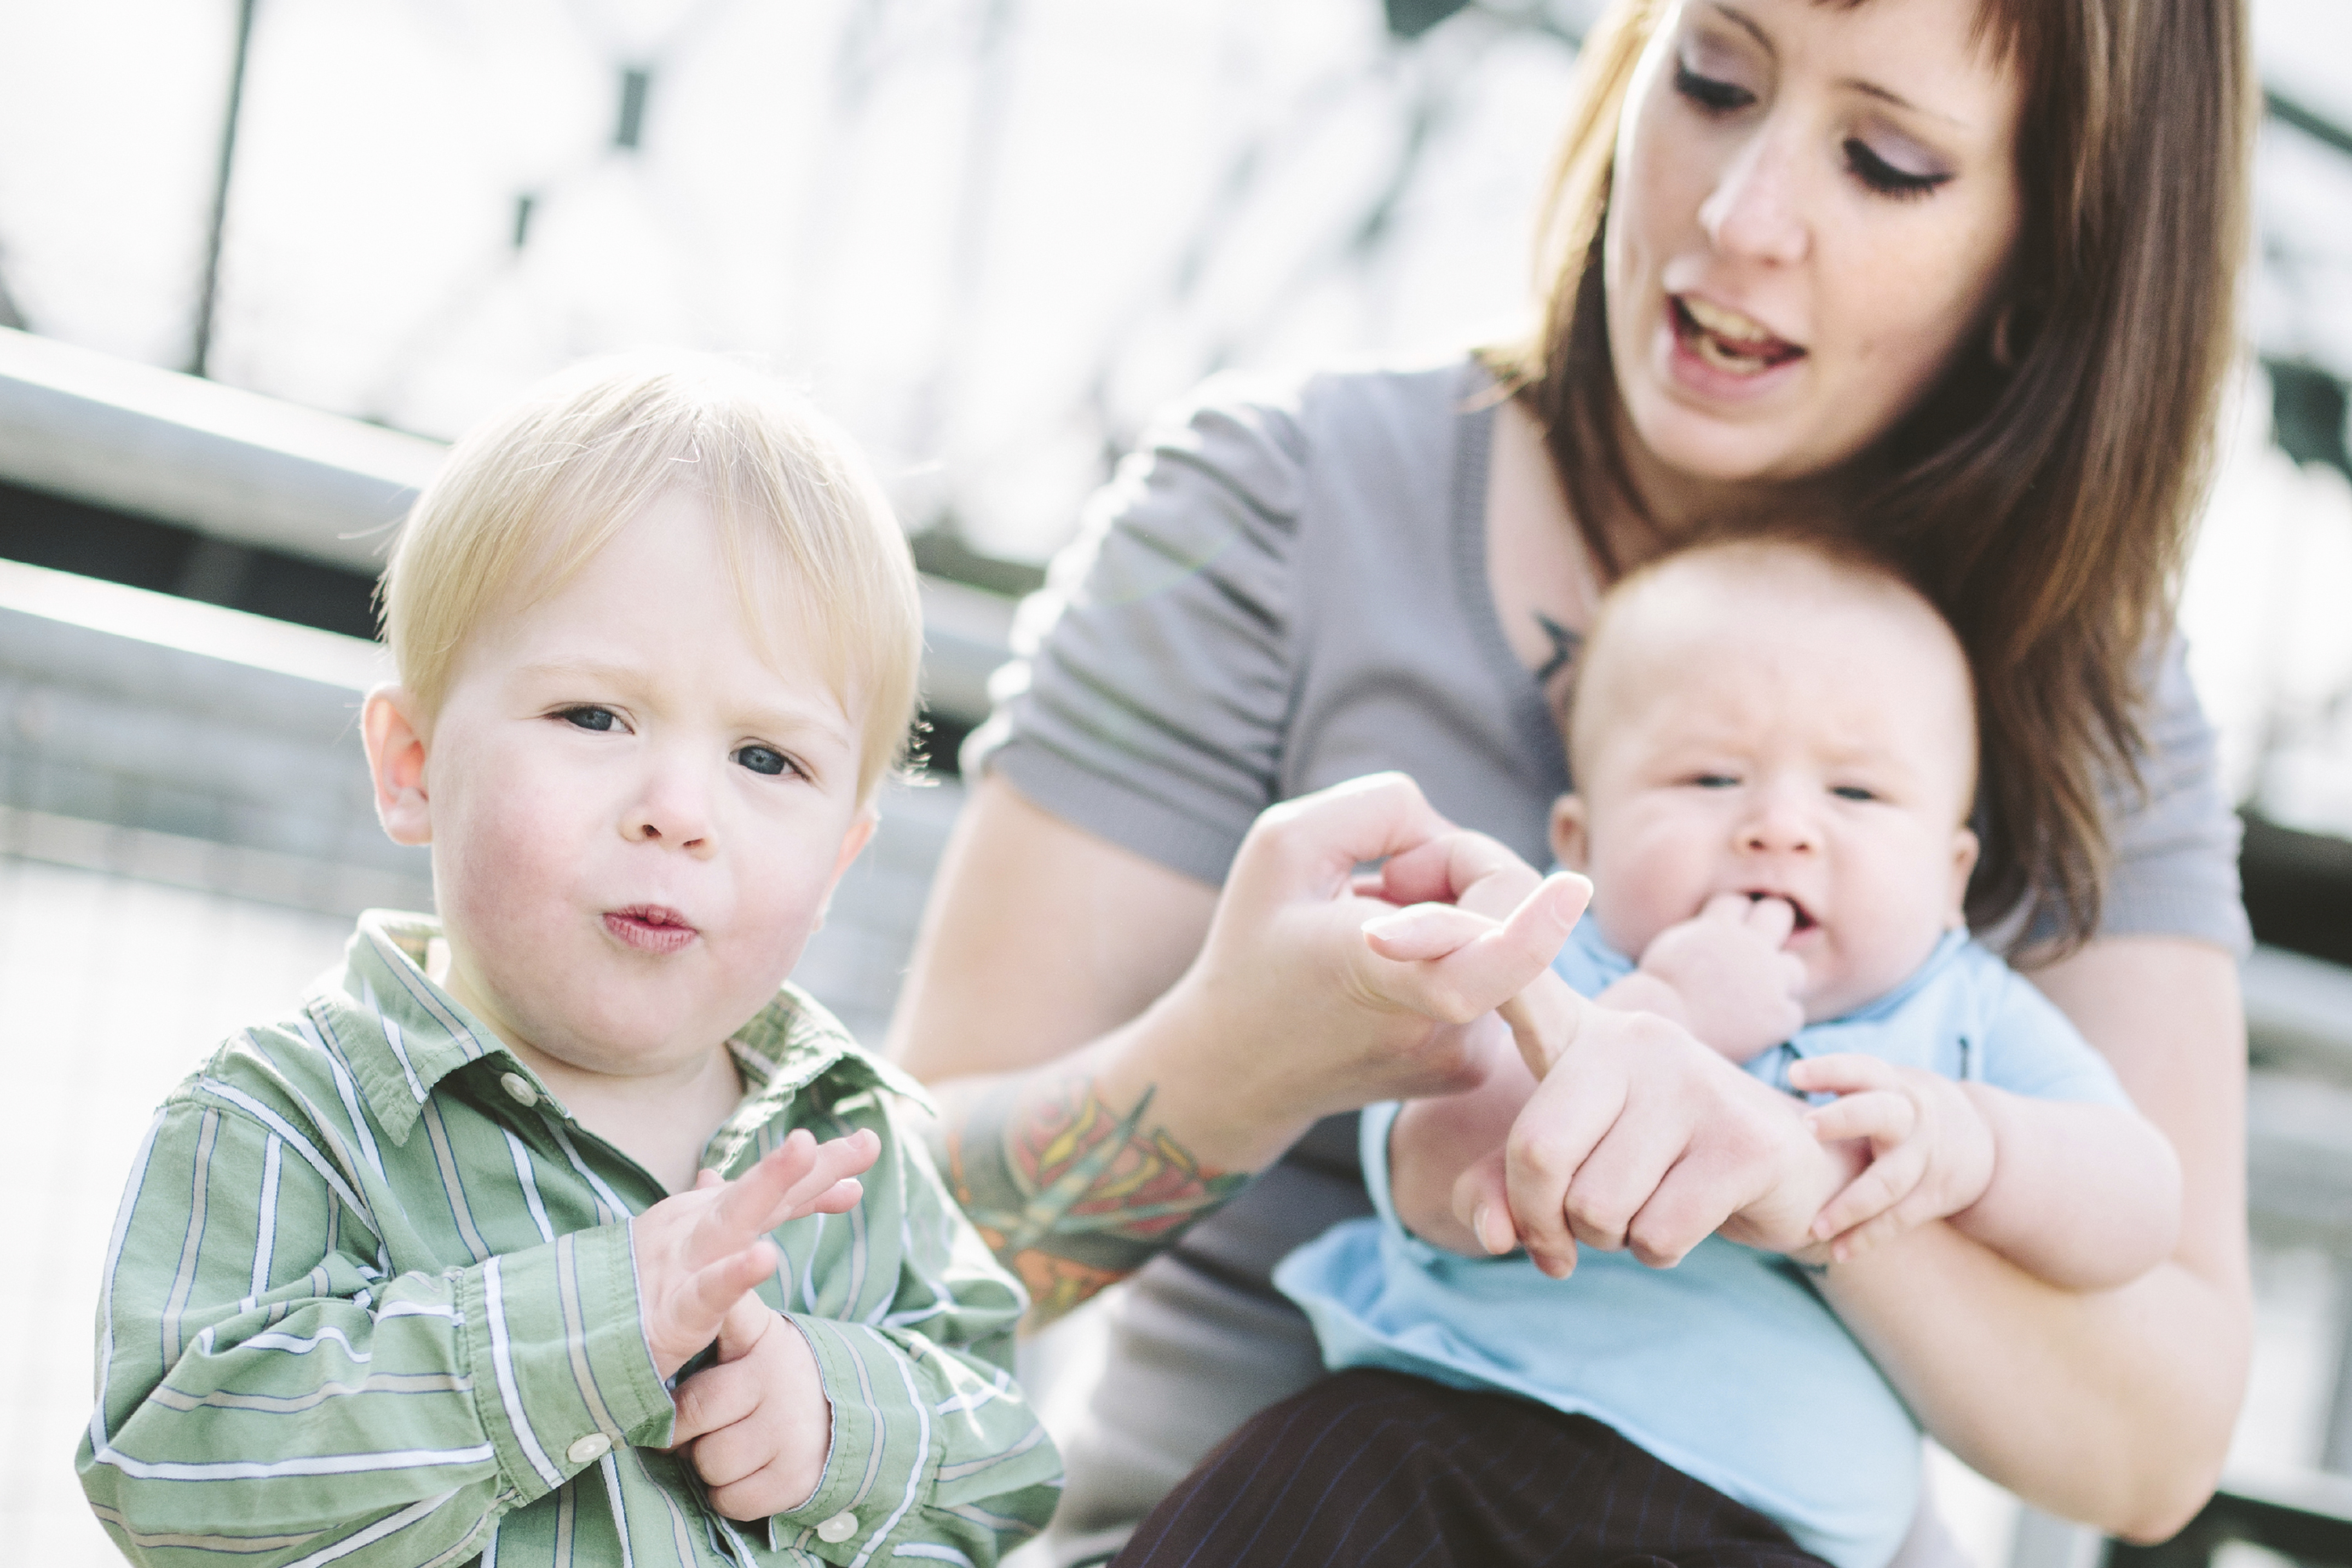 A parent using sign language with a young child. (iStock Photo)